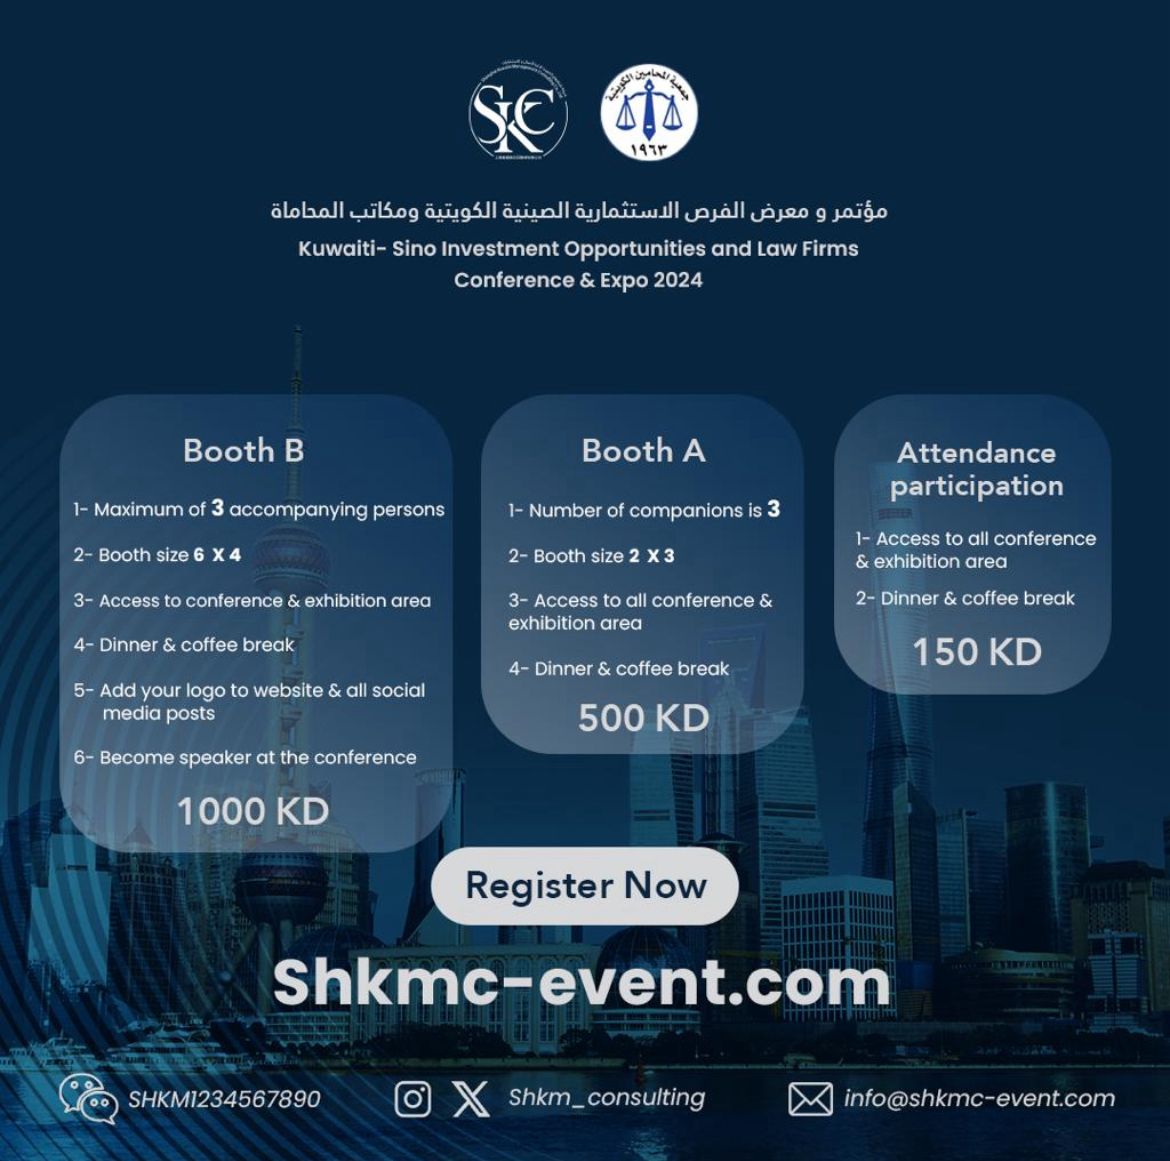 Kuwaiti-Sino Investment Opportunities and Law Firms Conference & Expo 2024